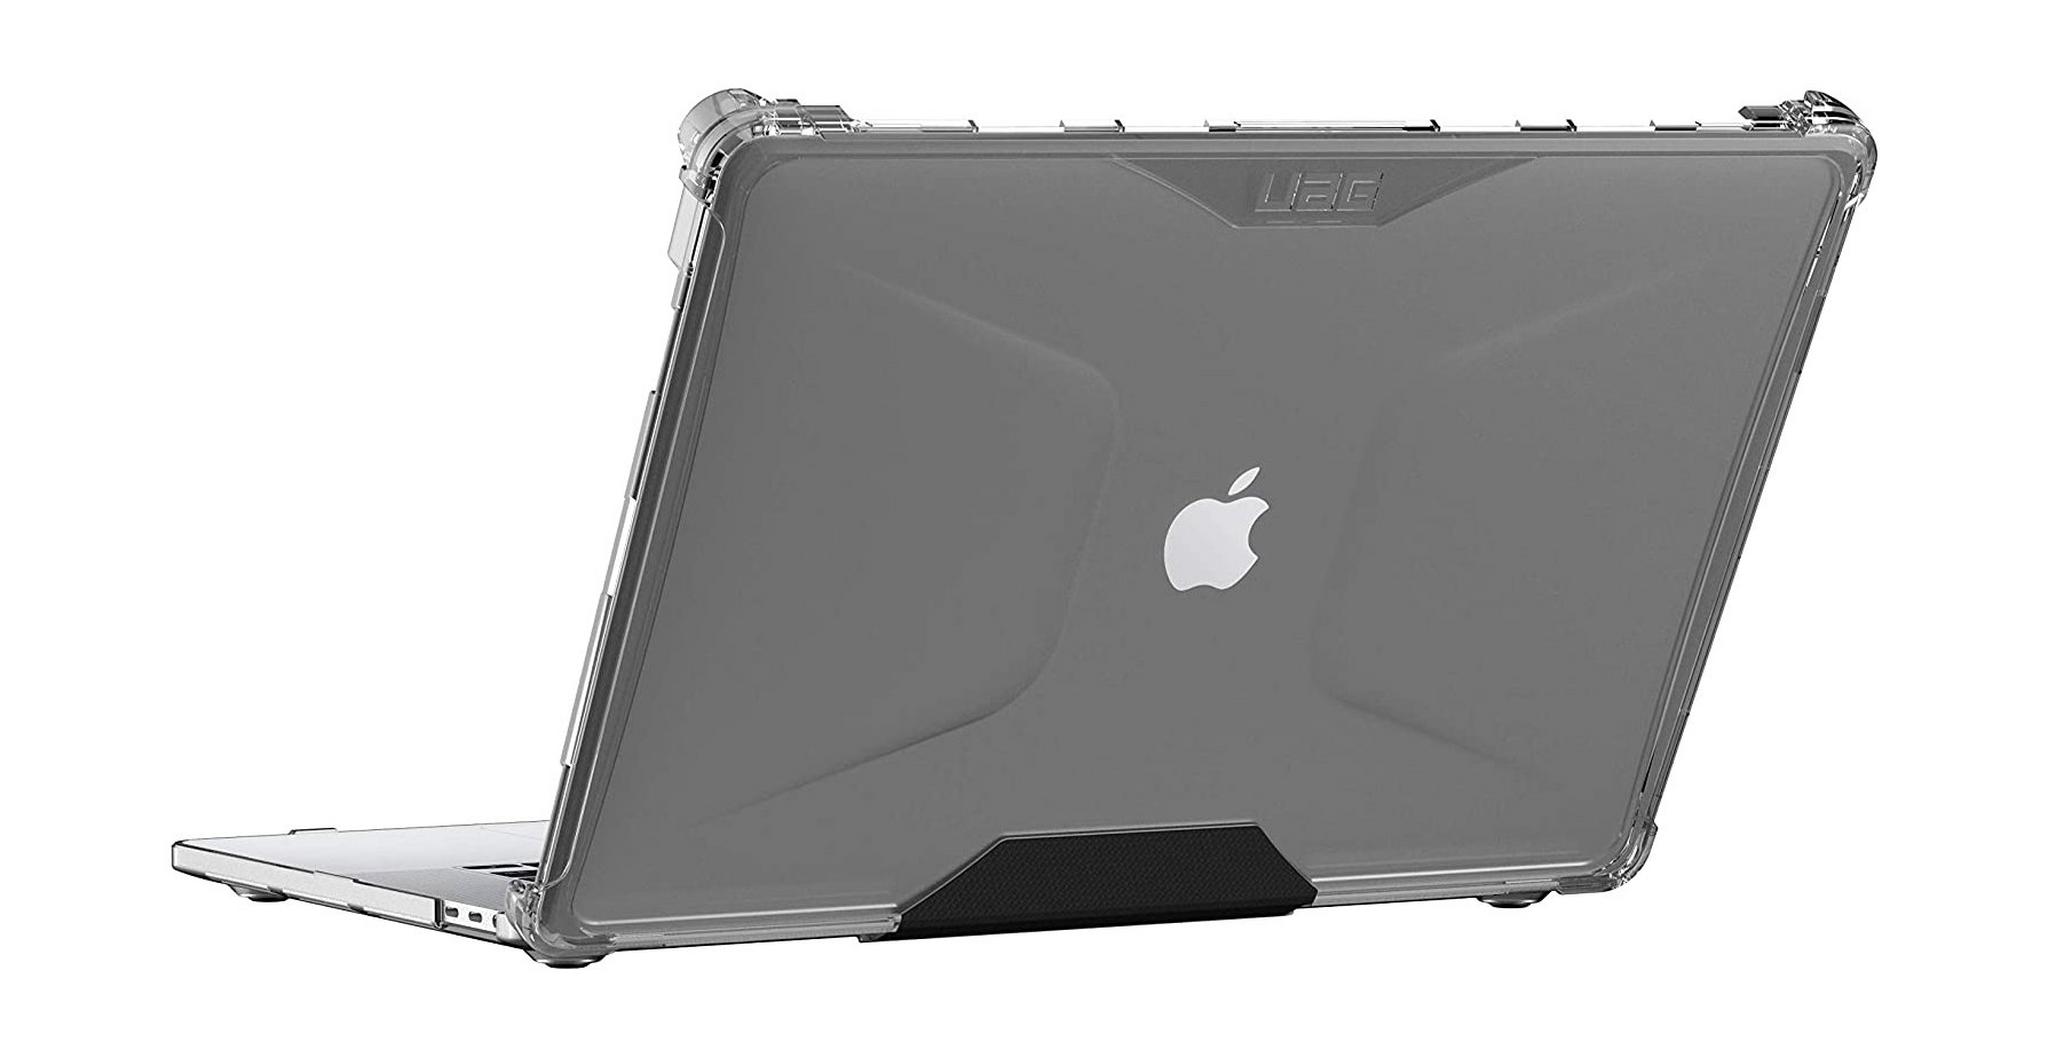 UAG MacBook Pro 16" Plyo Feather-Light Laptop Cover - Ice